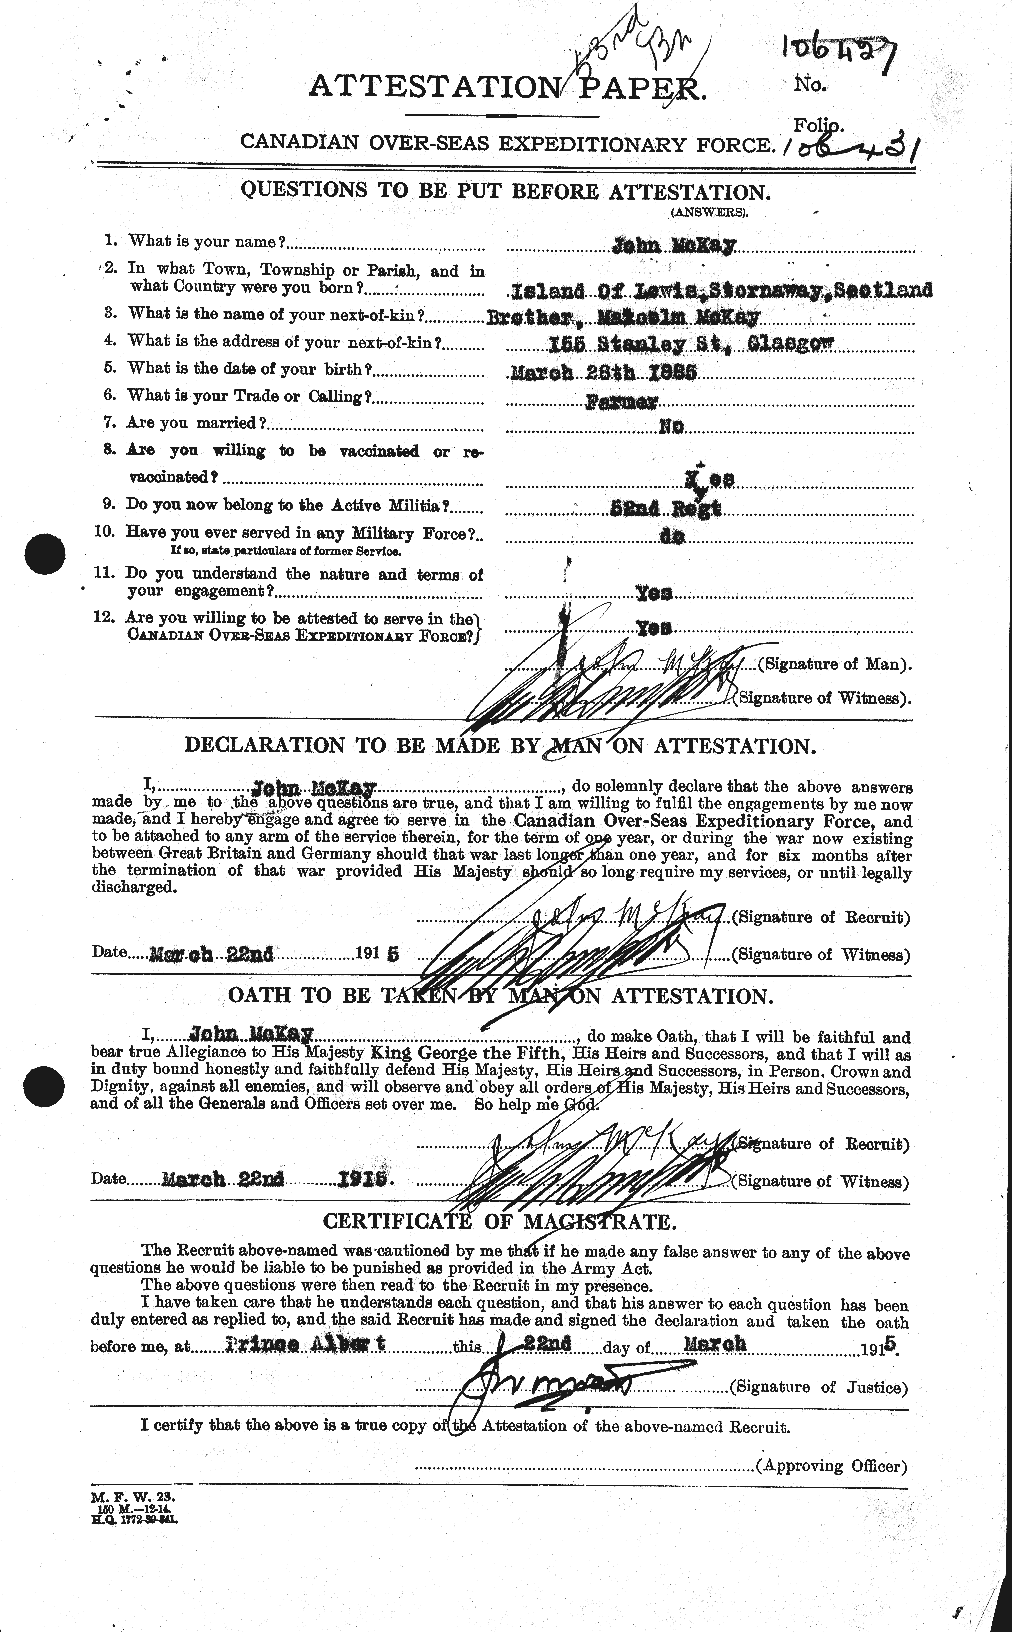 Personnel Records of the First World War - CEF 526961a